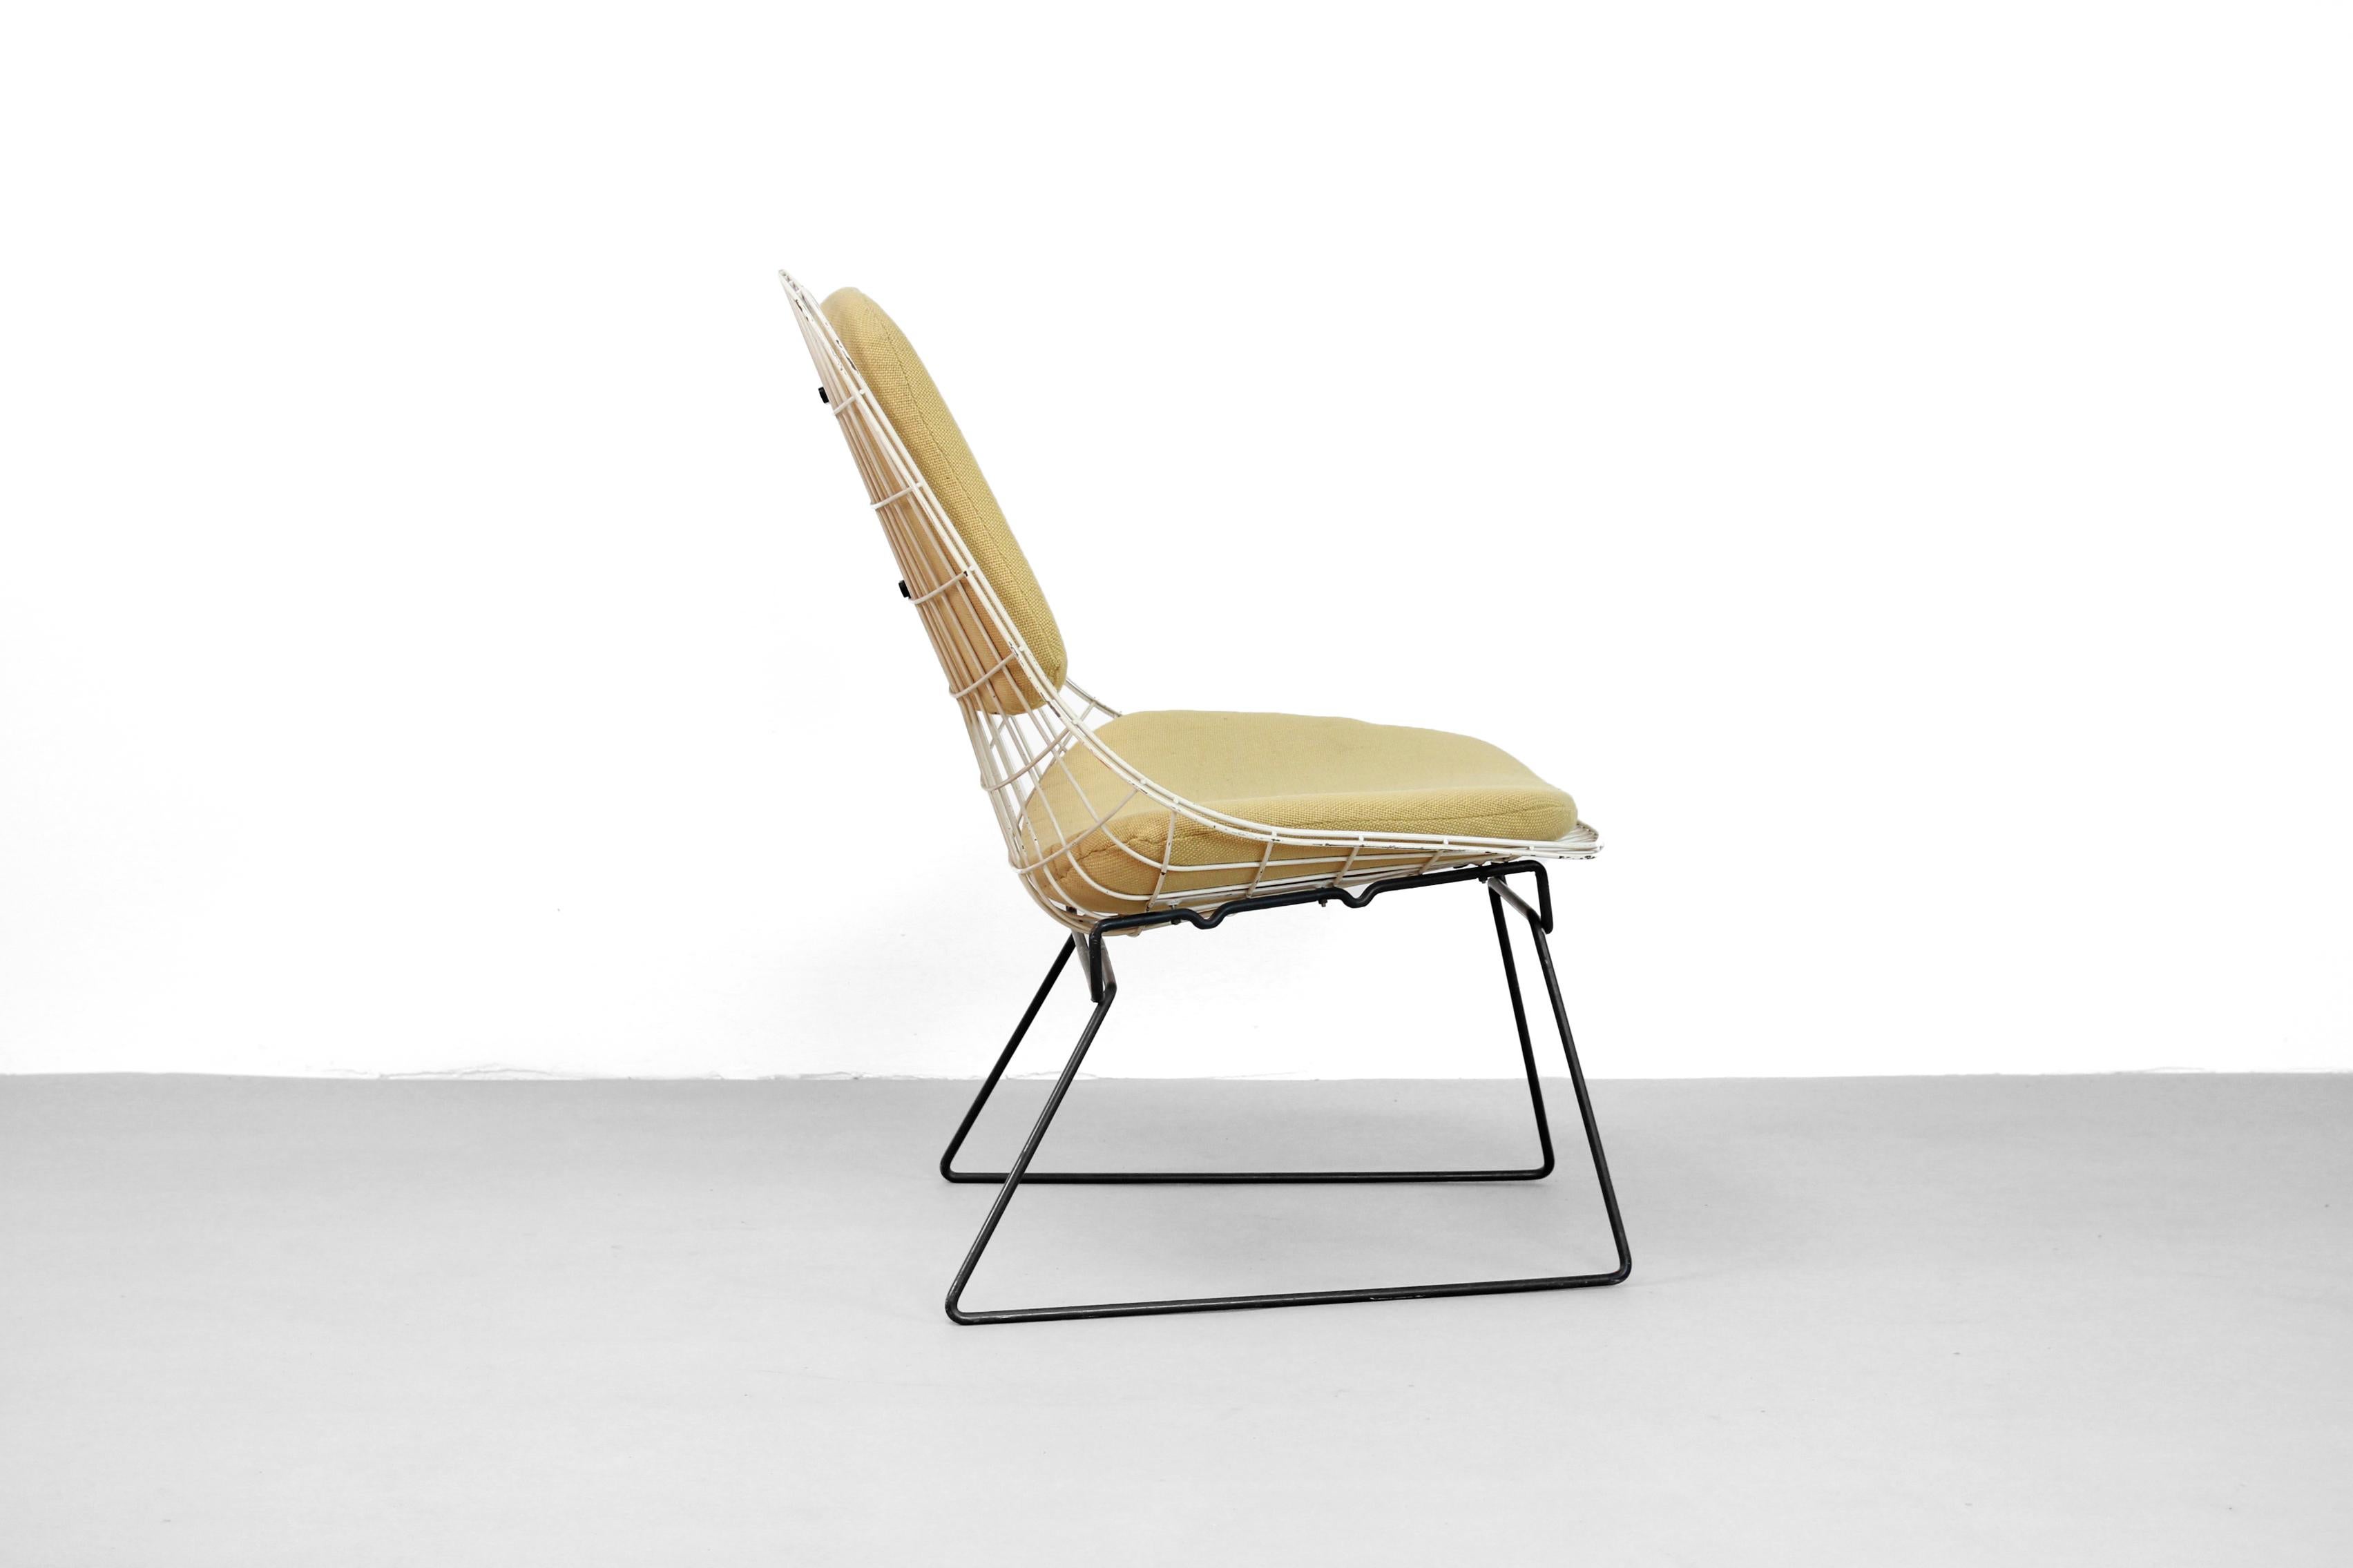 Beautiful original vintage wire lounge chair by Cees Braakman and Adriaan Dekker for Pastoe.
The FM05 is the lounge chair variant of the dining room chairs SM05. The Pastoe FM05 wire chair was designed in 1958 by Cees Braakman. What was striking